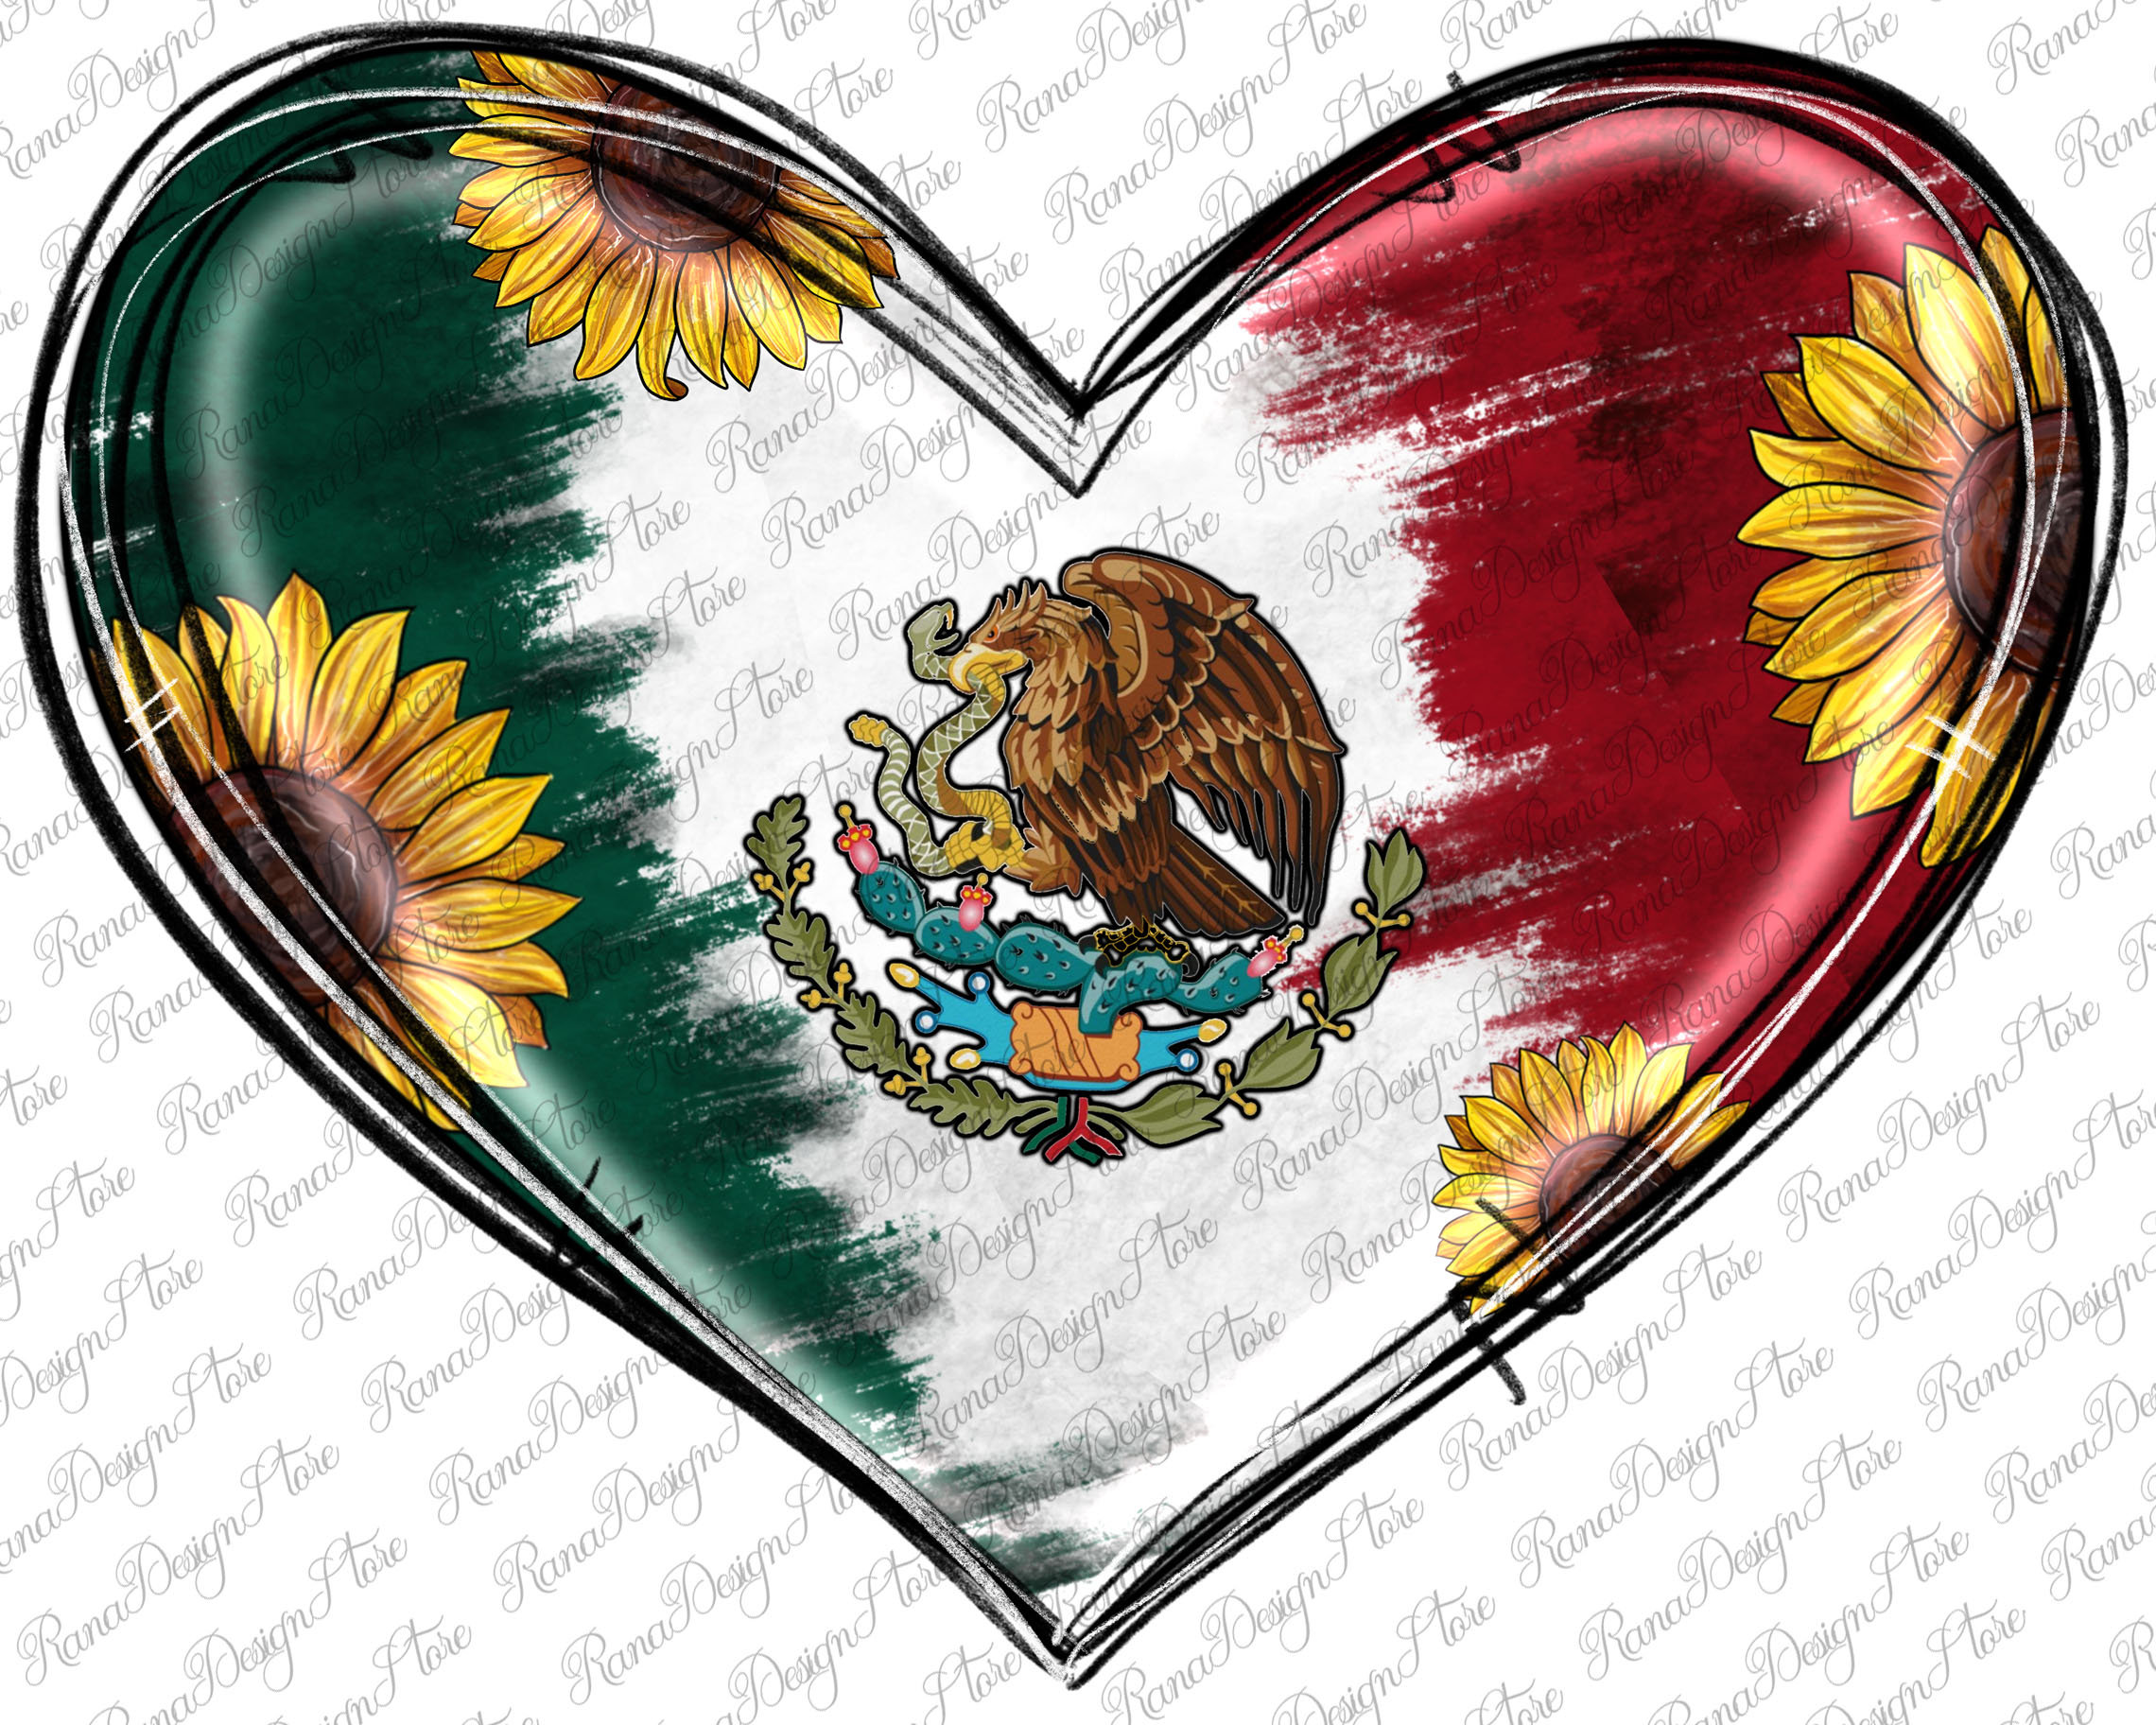 Mexican Flag Heart Art Print by AwesomeArt